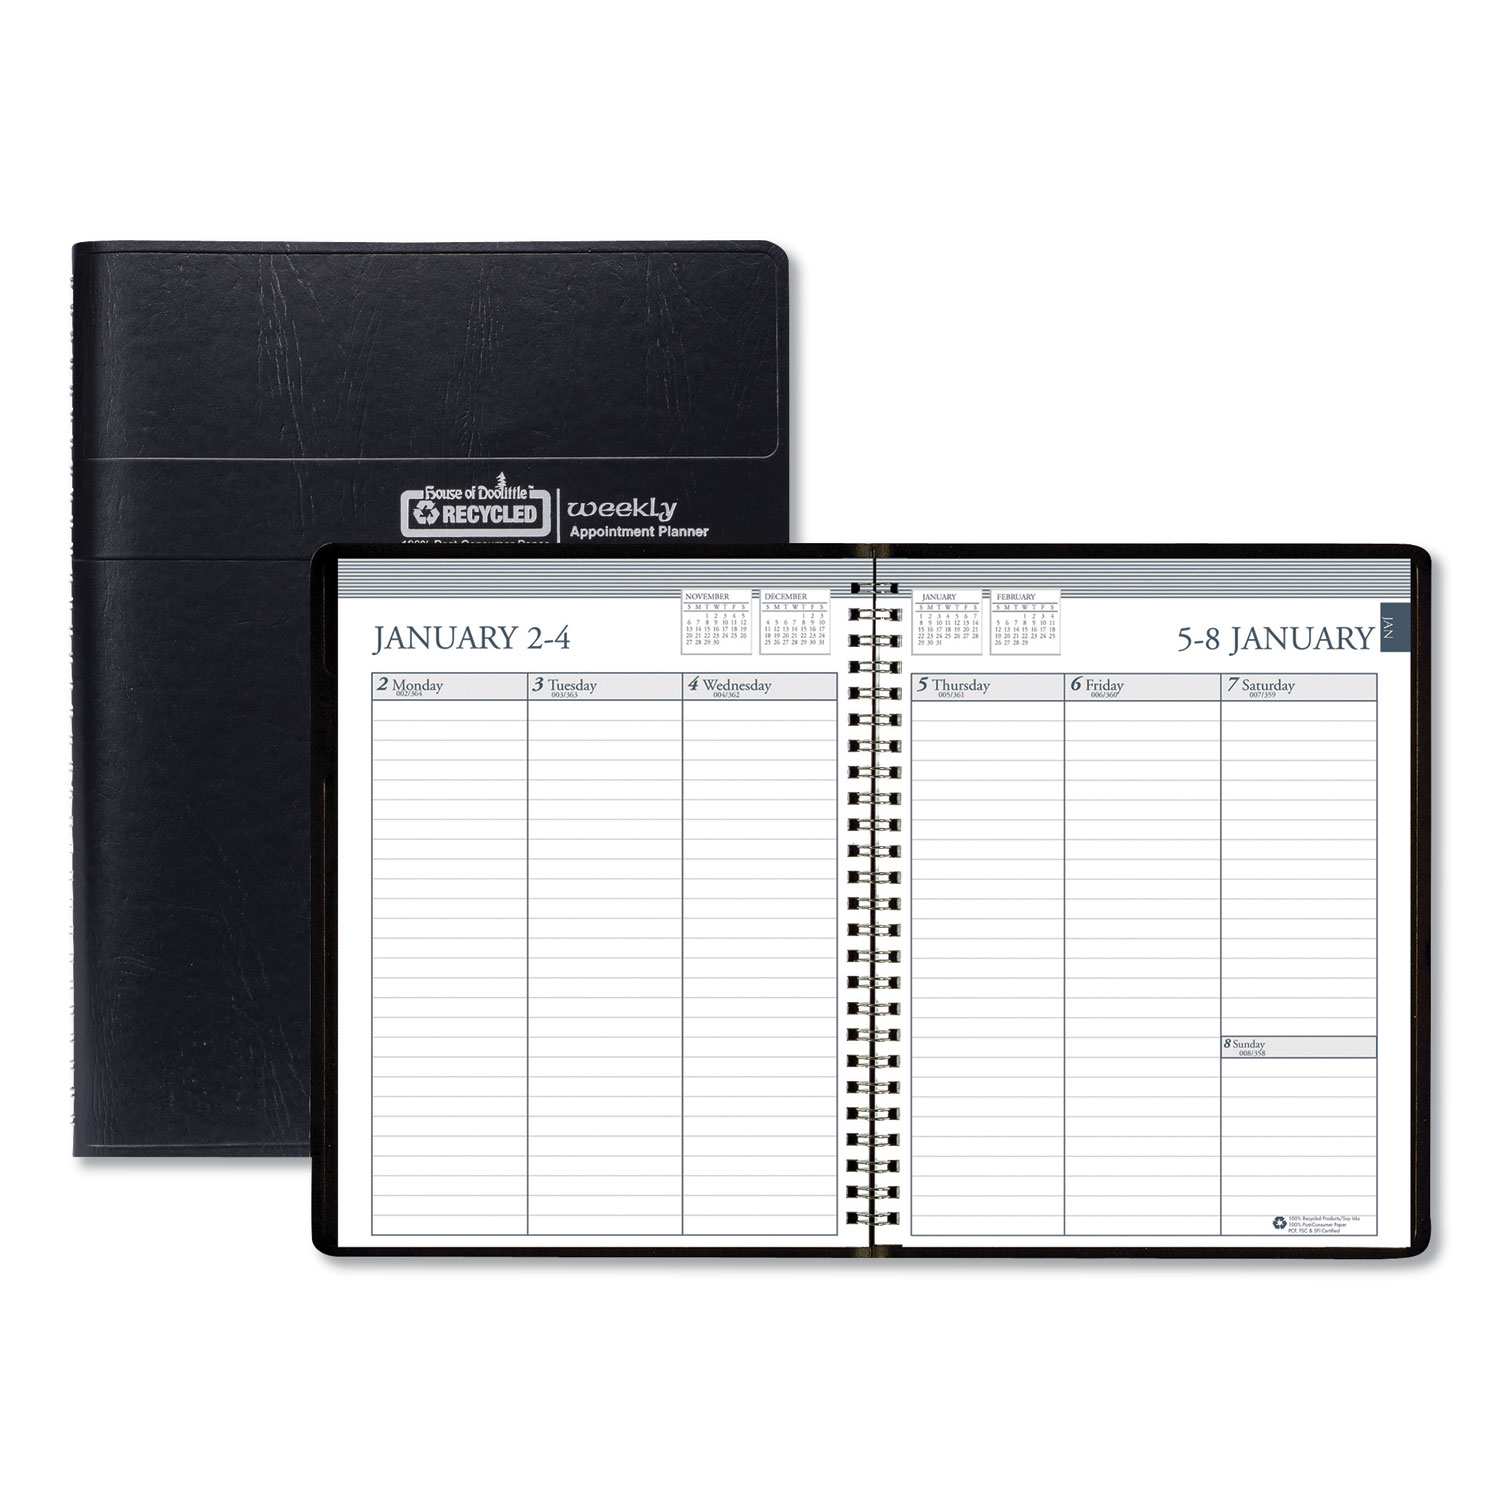  House of Doolittle 258-02 Recycled Weekly Appointment Book, Ruled without Times, 8 3/4 x 6 7/8, Black, 2020 (HOD25802) 